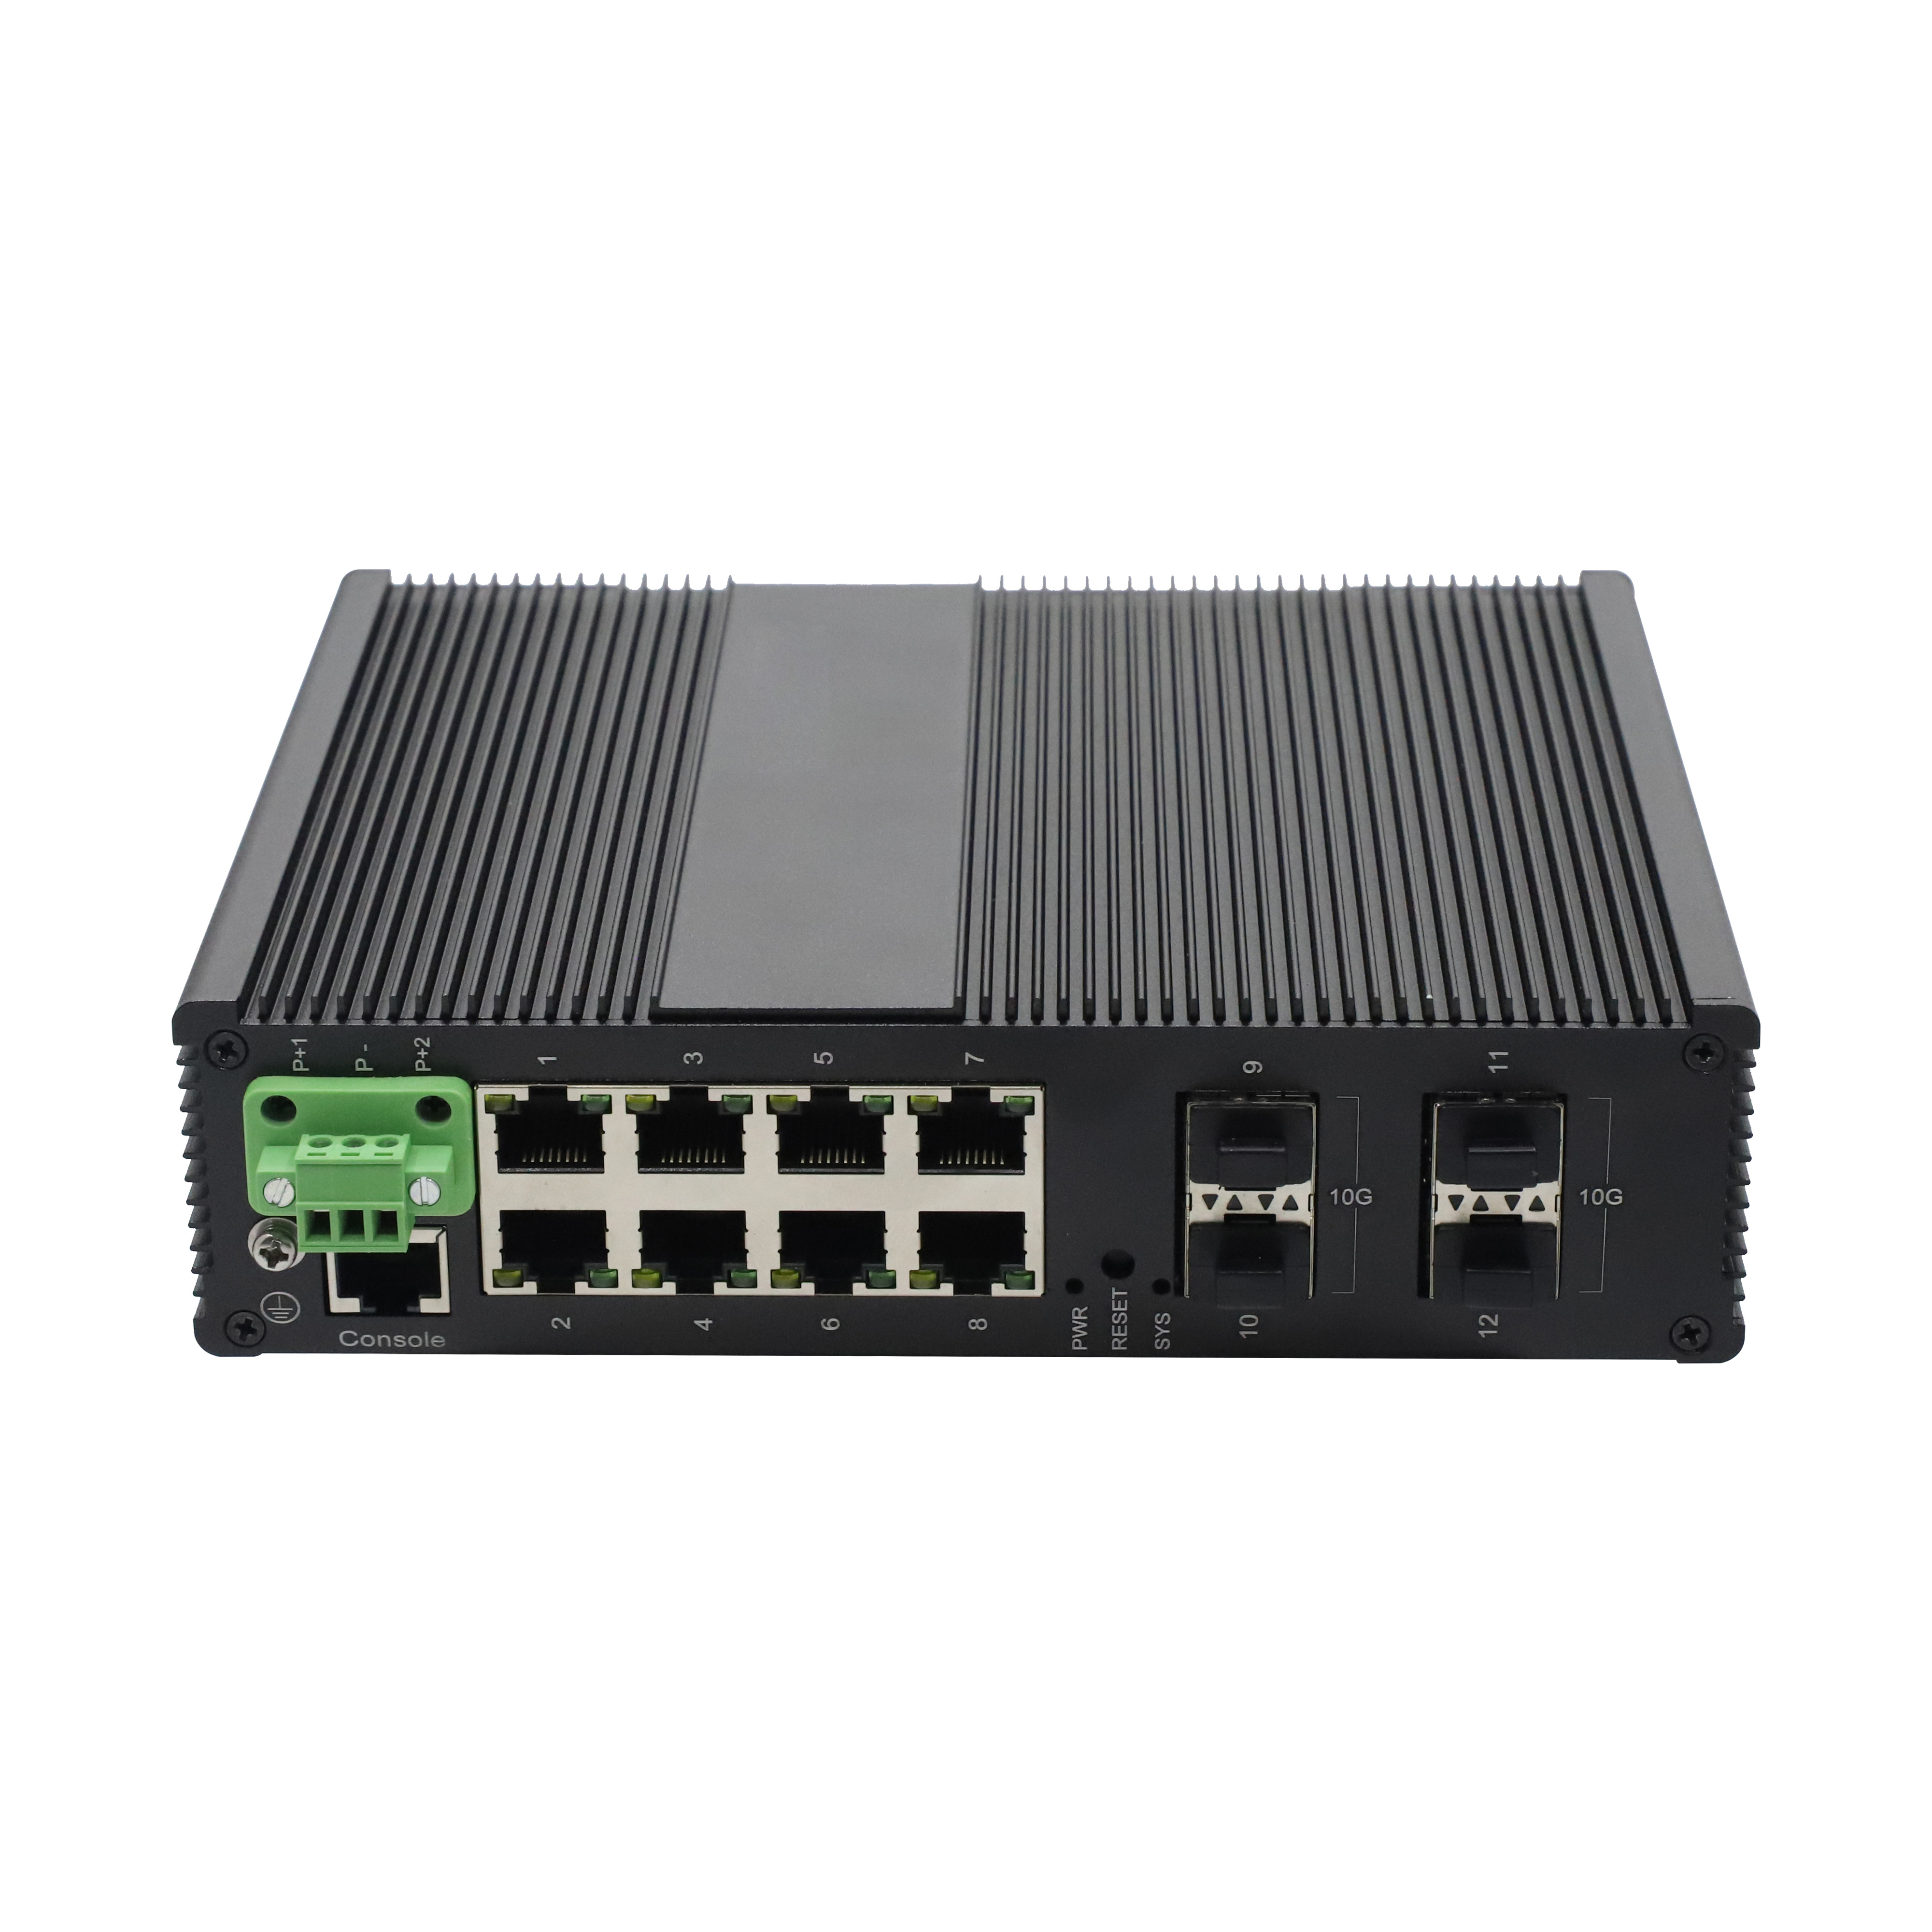 Wholesale China 12 Port 10g Fiber Switch Suppliers Factories - 8 Port 1000M L2/L3 MANAGED INDUSTRIAL ETHERNET SWITCH with 4 10G SFP+ Slot | JHA-MIWS4G08H – JHA